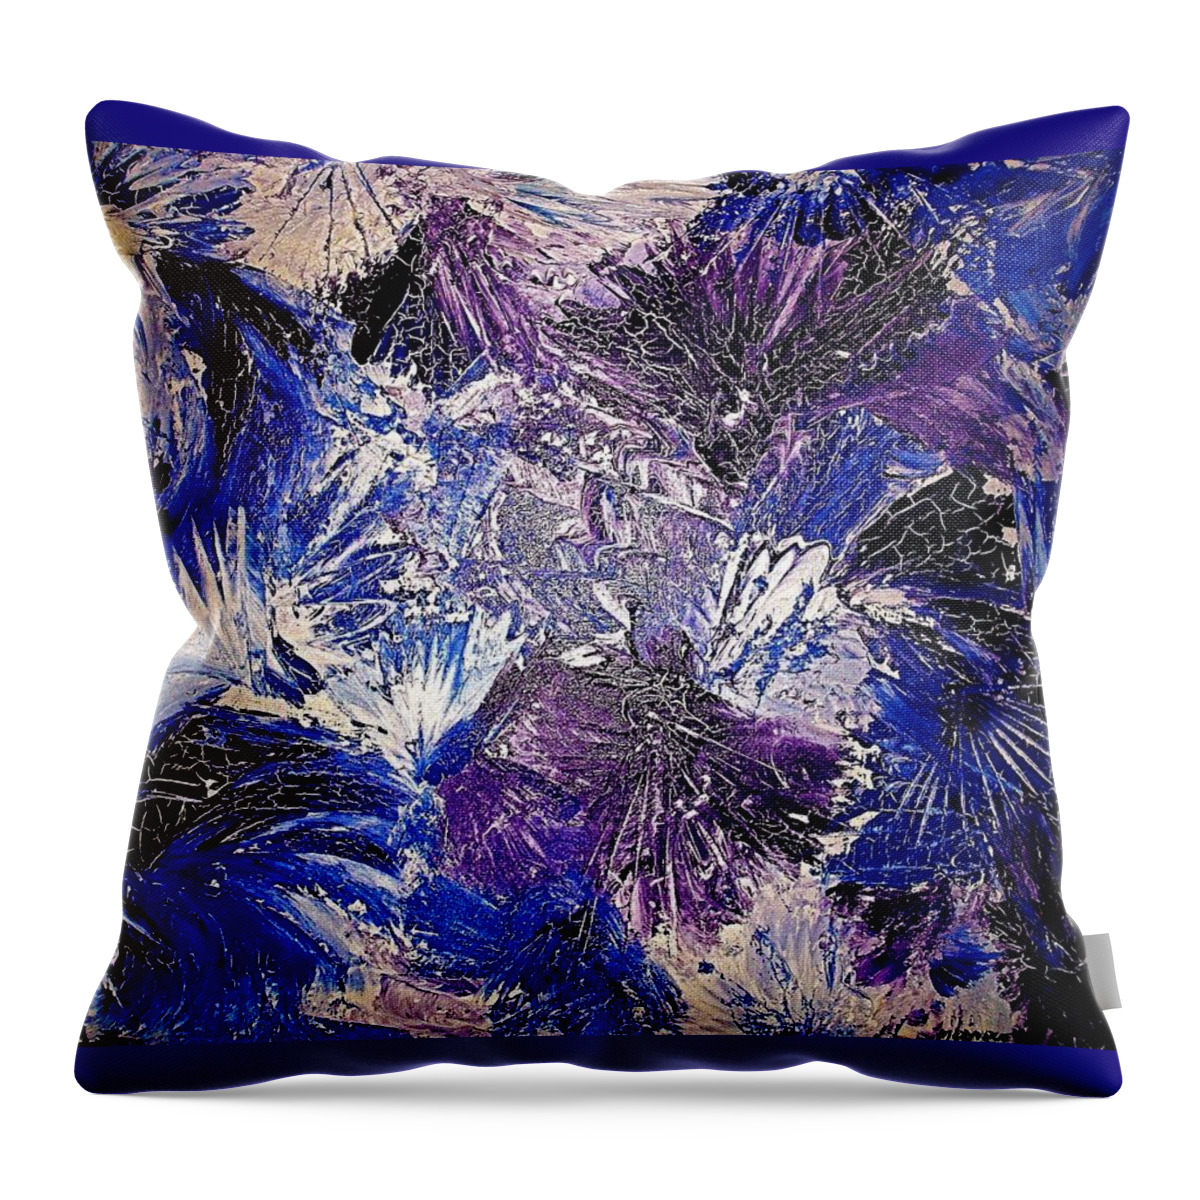 Painting Acrylics Prints Throw Pillow featuring the painting Feathers In The Wind by Monique Wegmueller